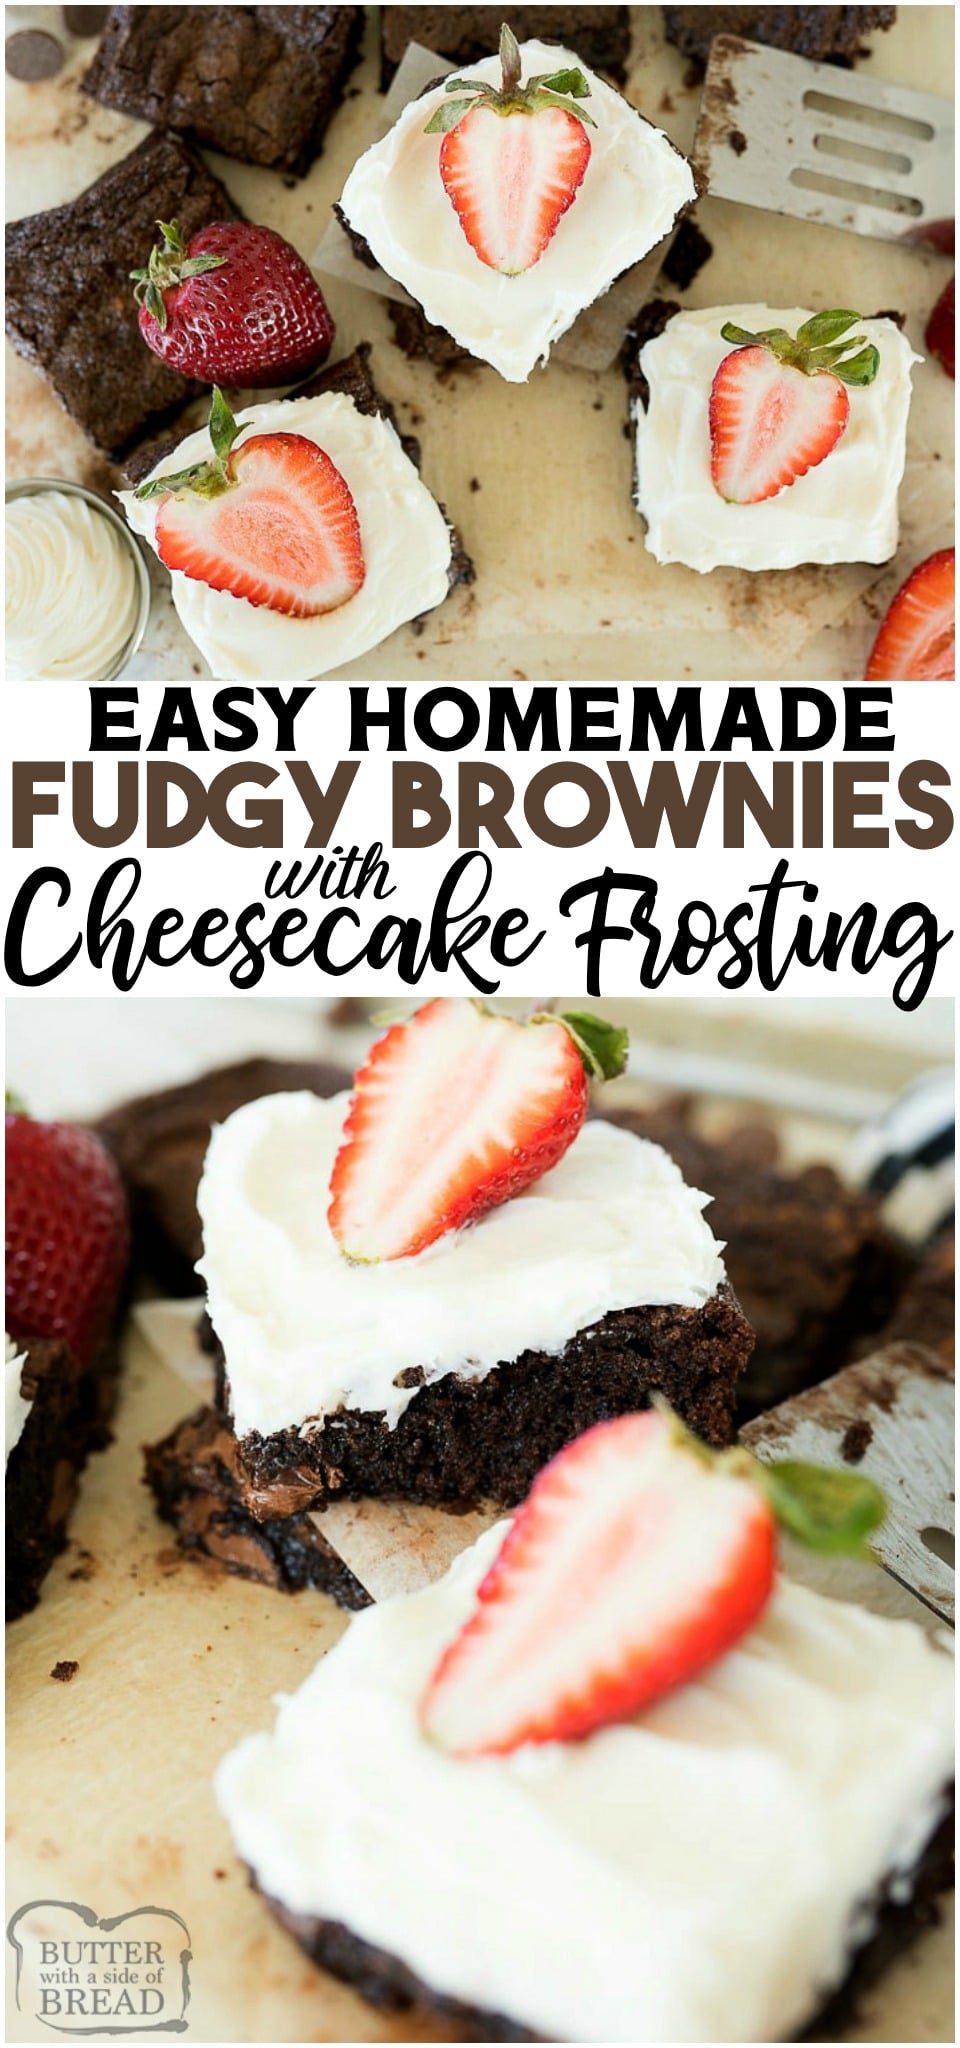 Brownies with a Cheesecake Frosting topped with fresh strawberries for a rich and decadent dessert! Fudgy homemade brownies topped with creamy Cheesecake frosting and fresh strawberries.